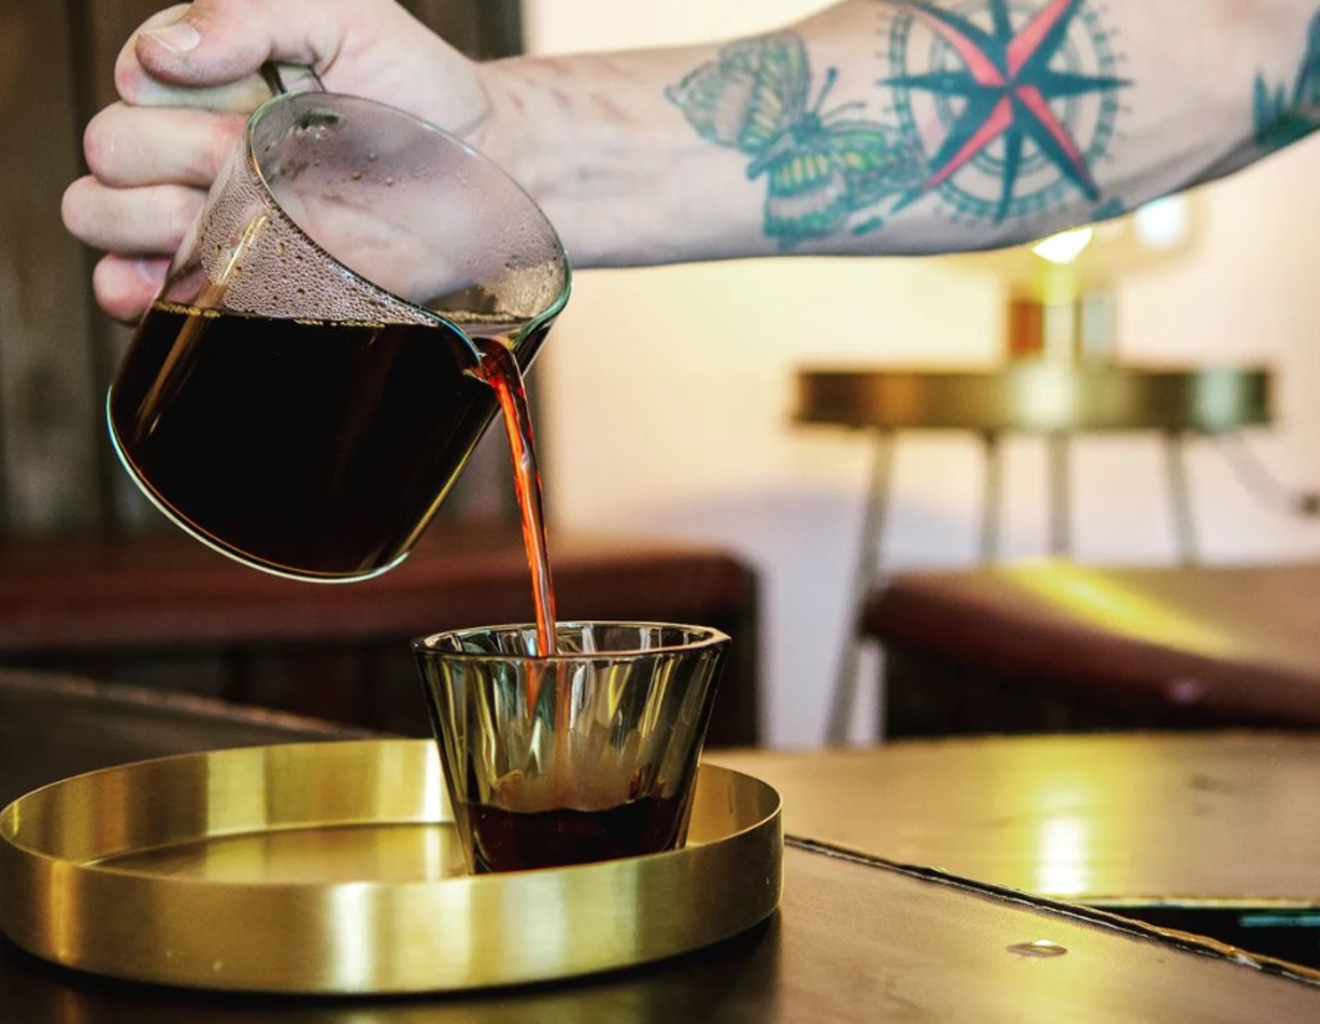 Subjective Coffee is now open in Westminster.